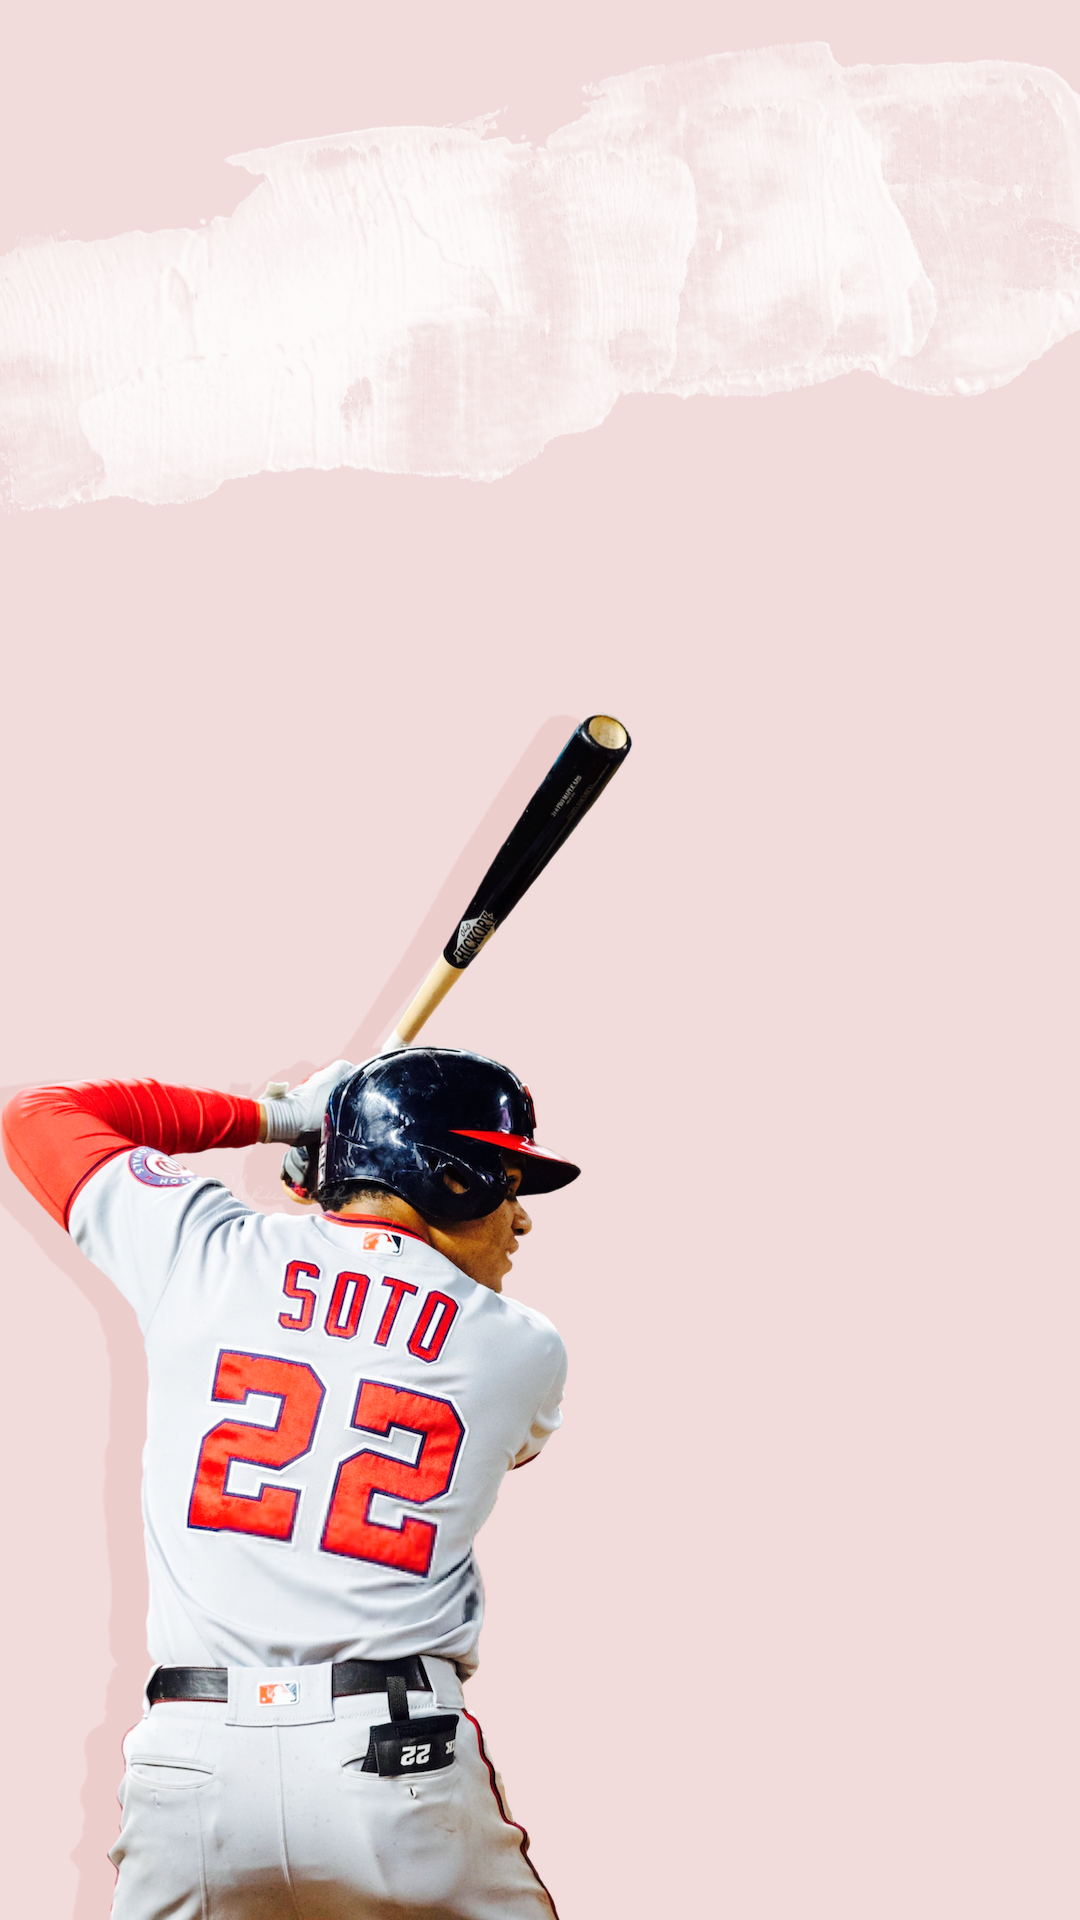 Soto Wallpapers